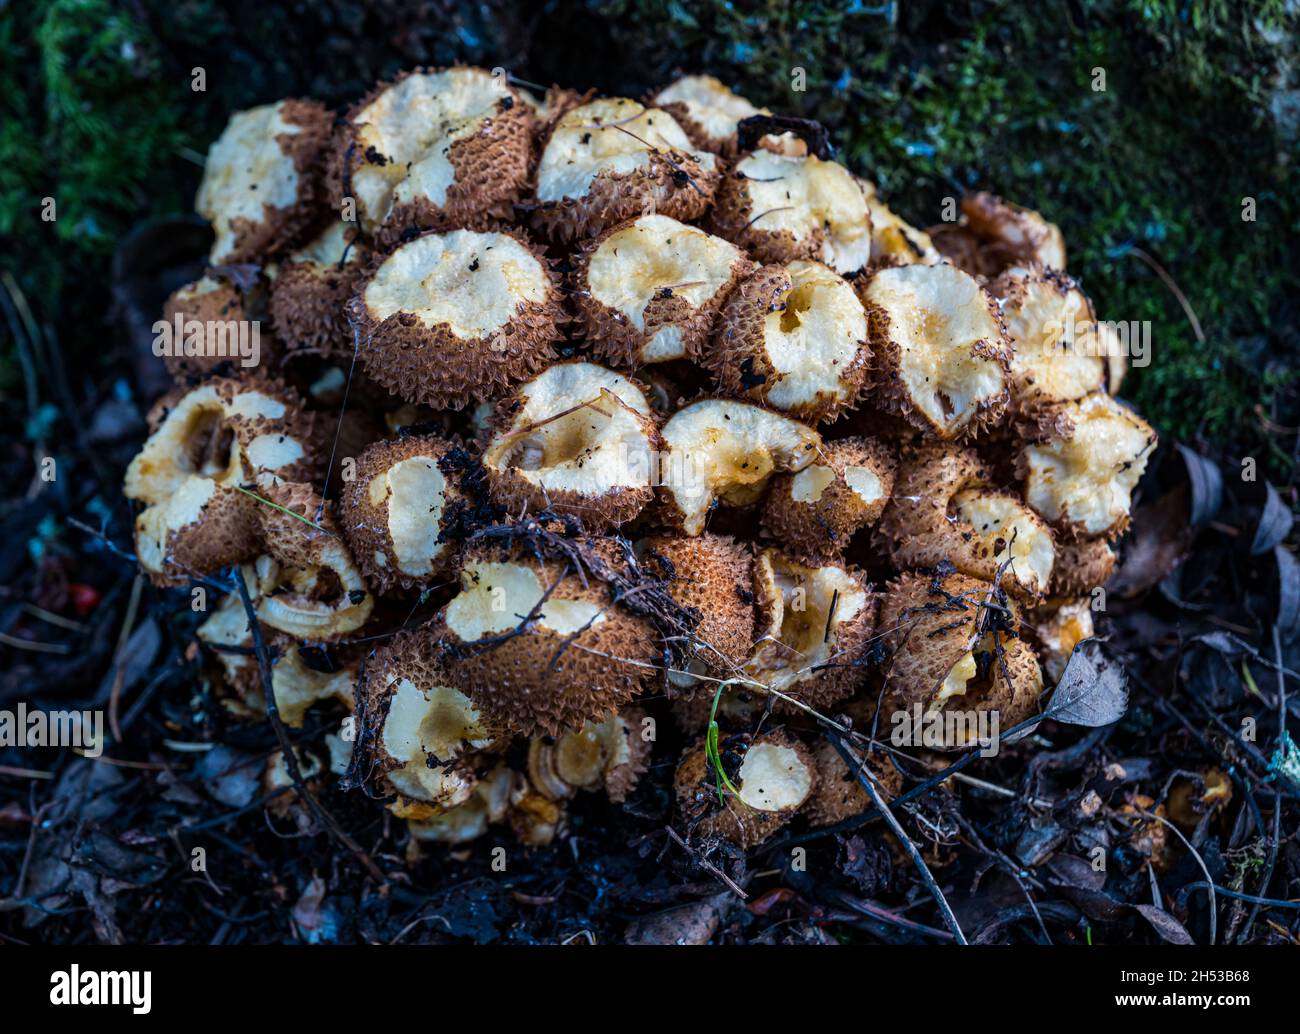 A cluster of edible stump puffballs (Lycoperdon pyriforme) at base of woodland tree with evidence of being eaten, Scotland, UK Stock Photo